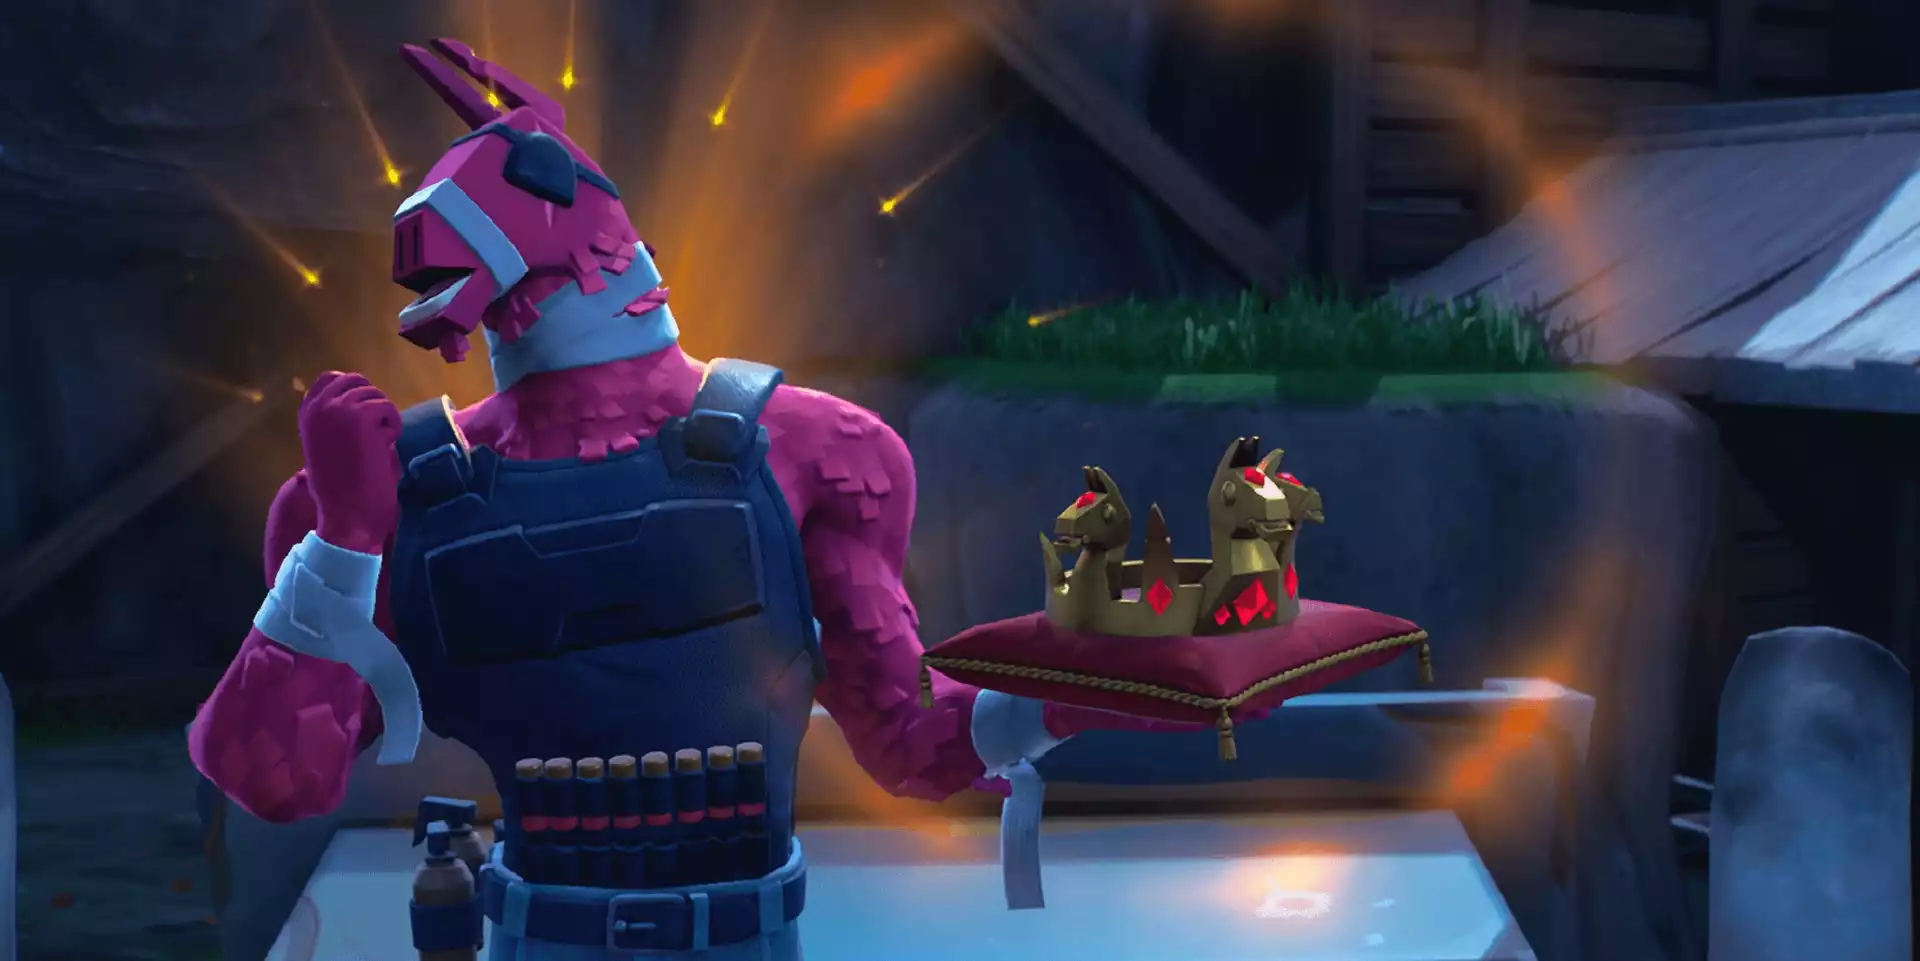 Fortnite Victory Crown: What Is It And How To Get One